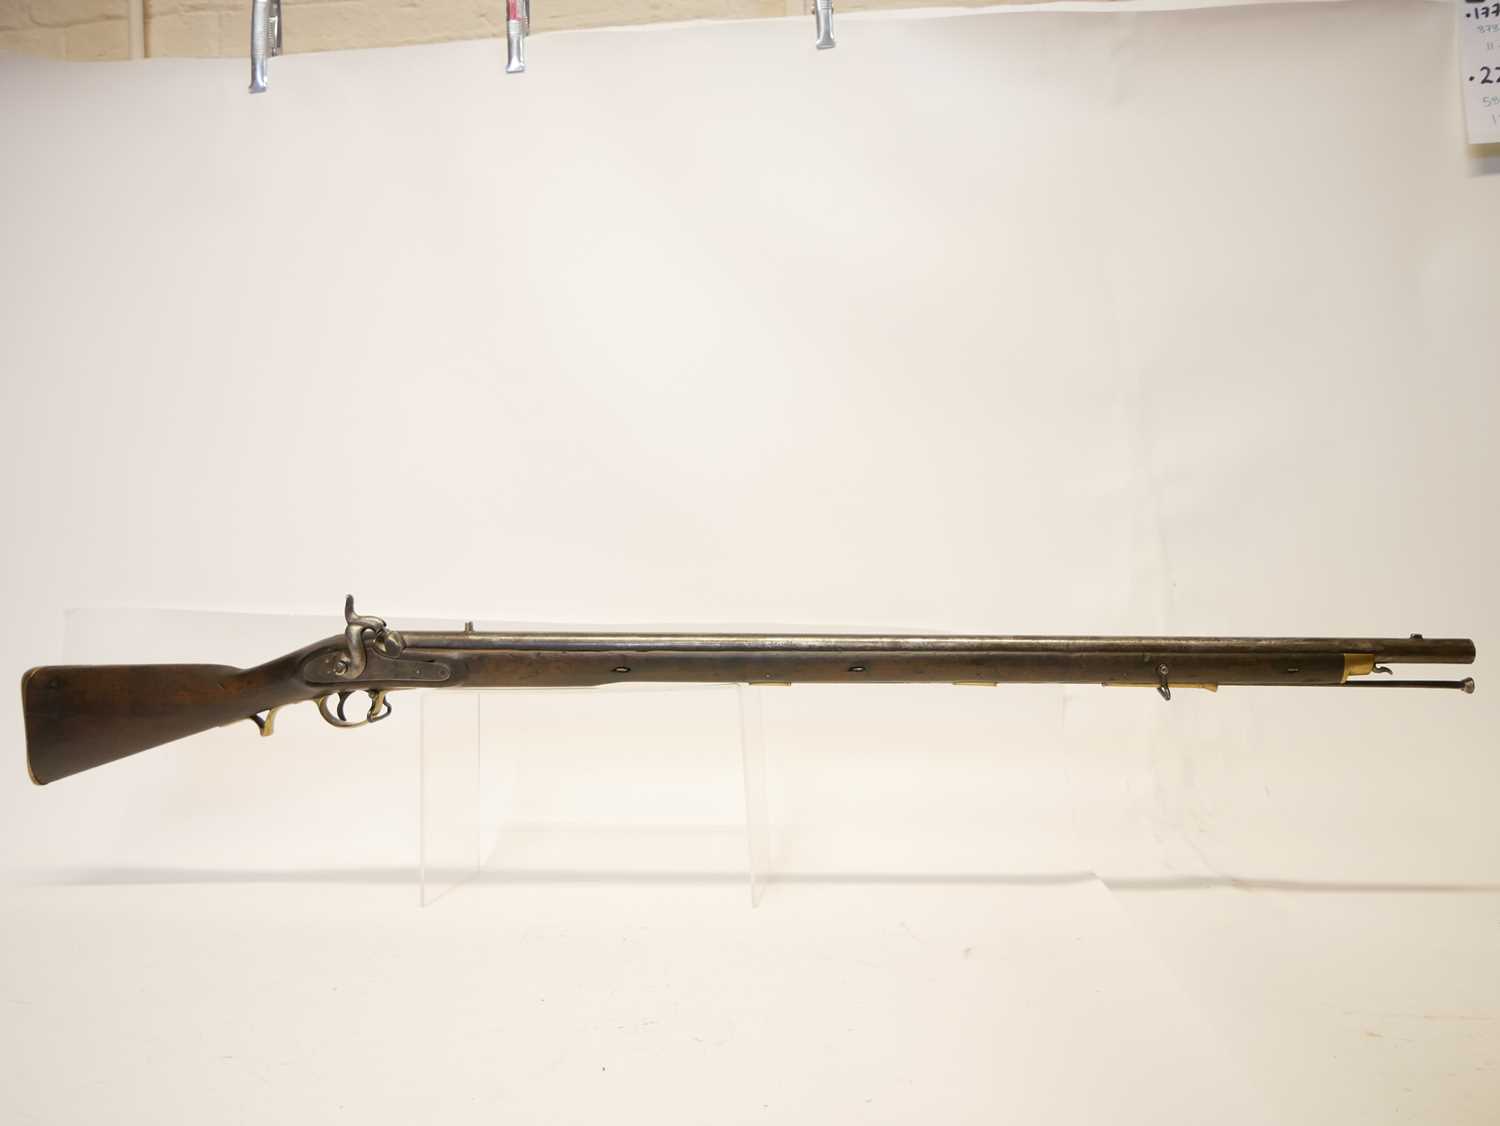 East India Company pattern D type 3 musket, - Image 2 of 14